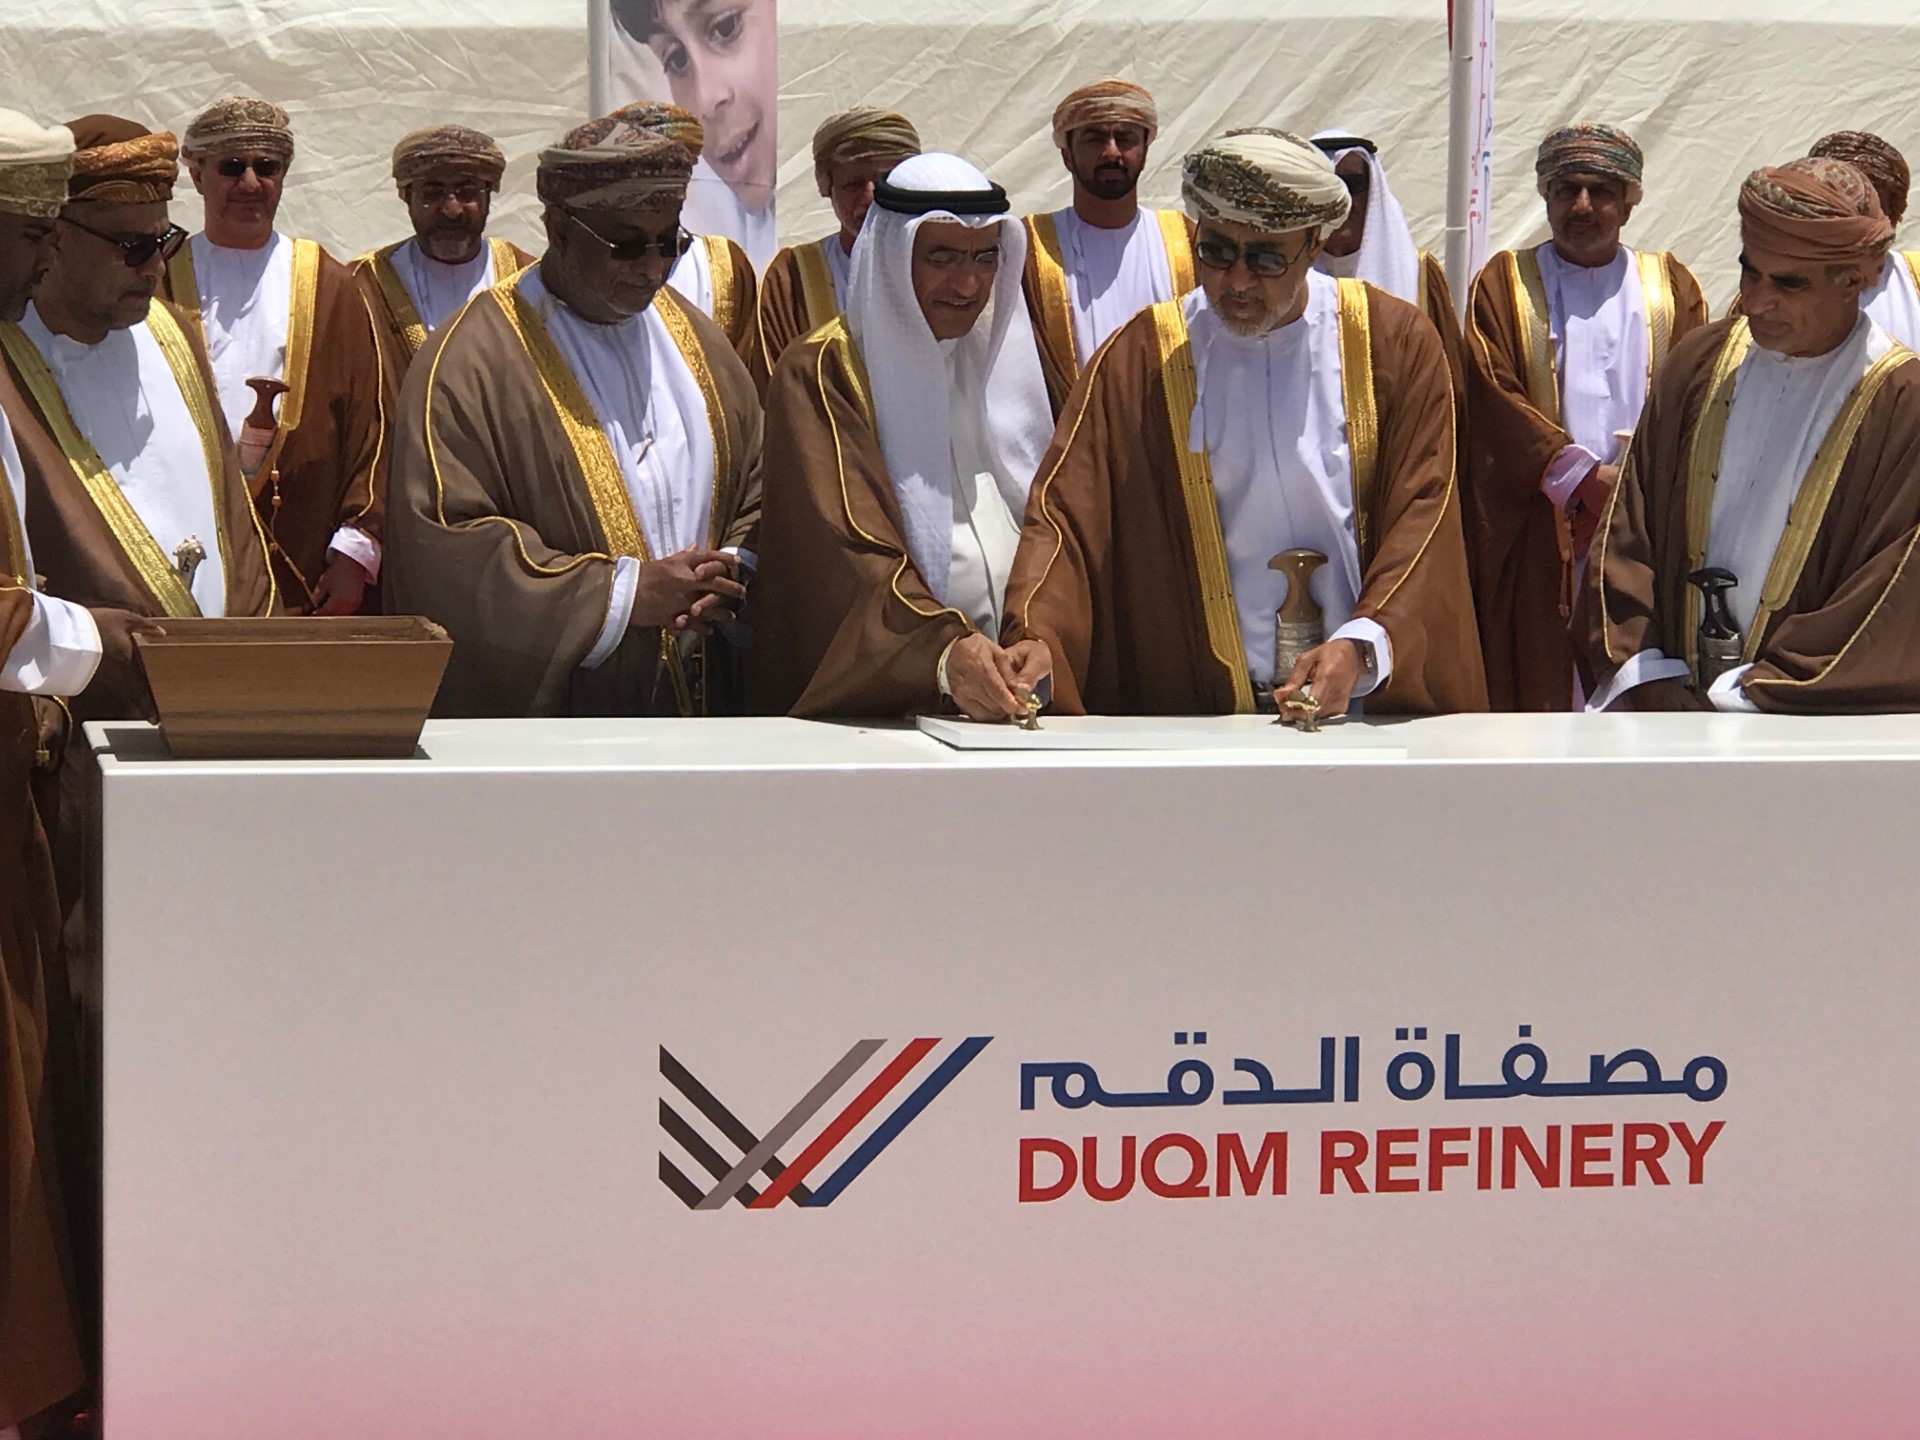 Inauguration of the Duqm Refinery Project